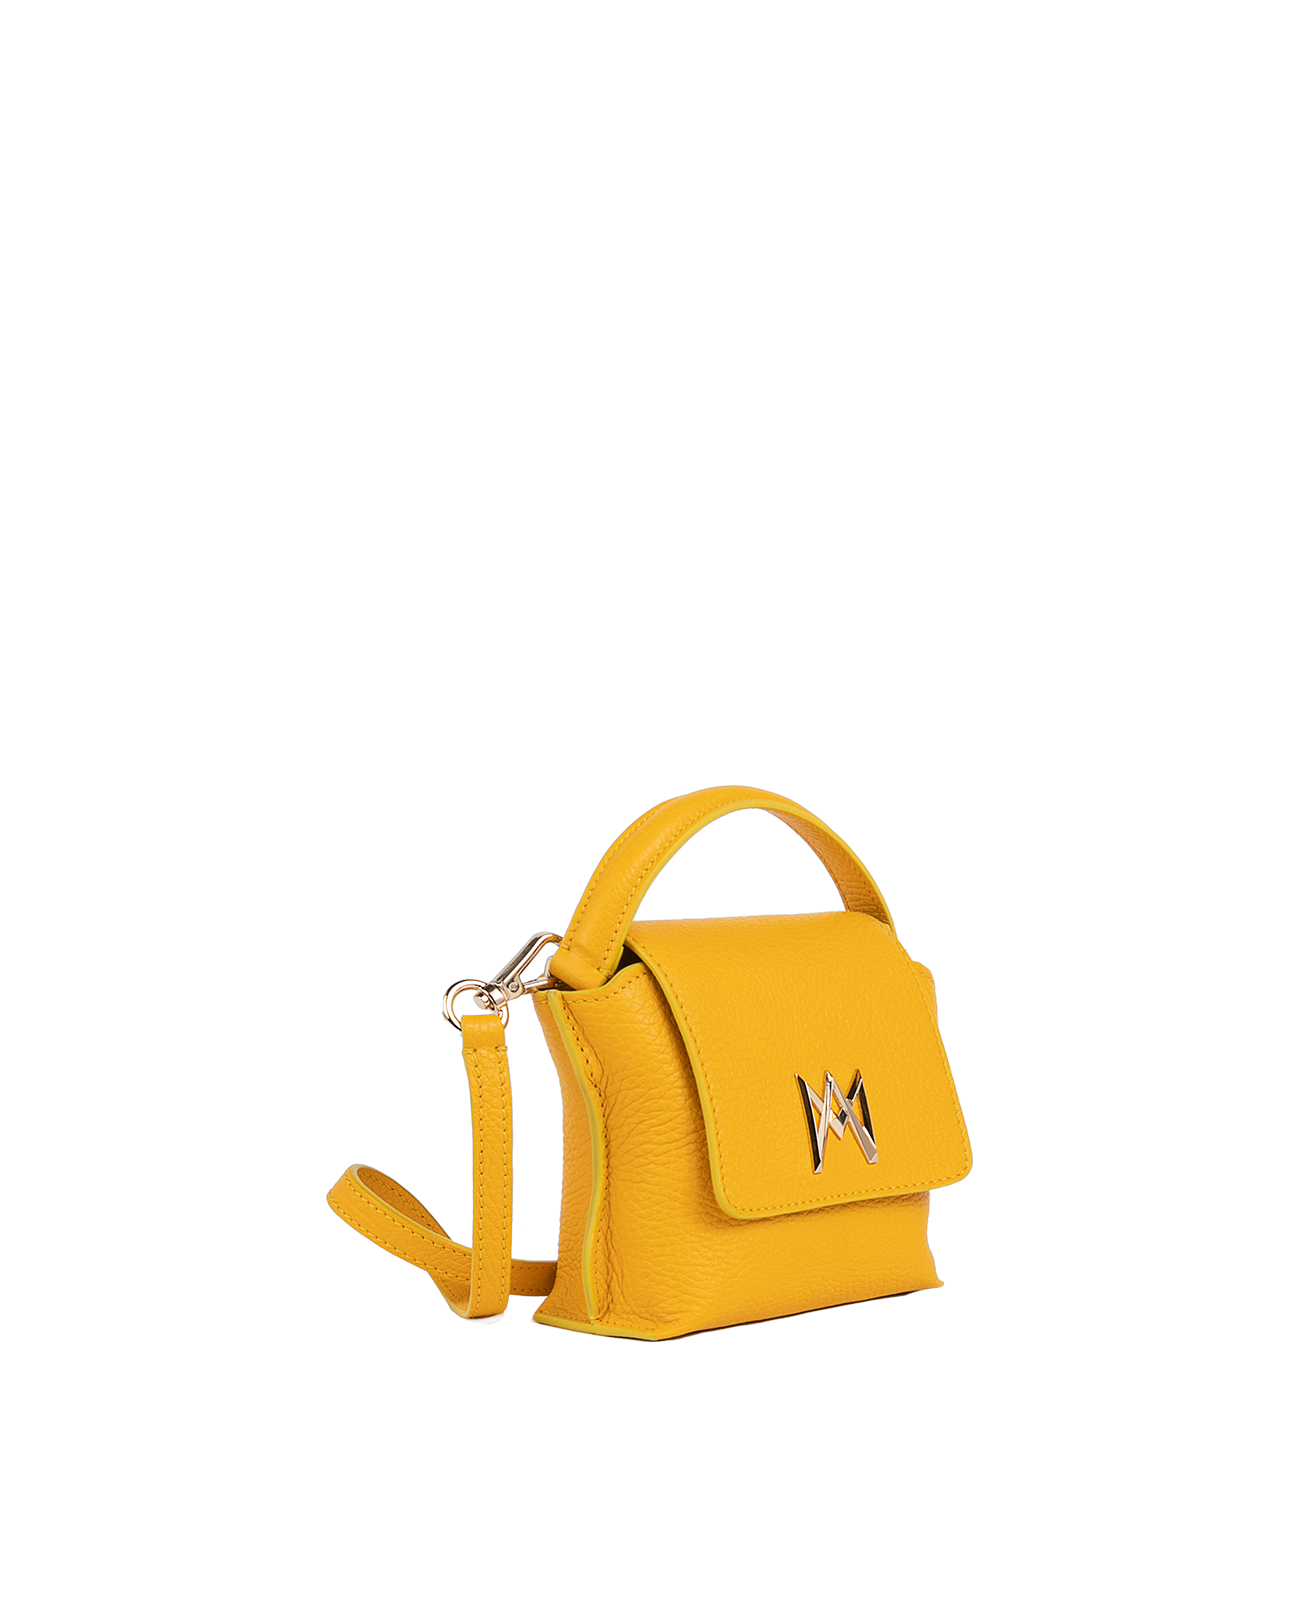 Cross-body bag in Italian full-grain leather, semi-aniline calf Italian leather with detachable shoulder strap.Three compartments, zip pocket in the back compartment. Magnetic flap closure with logo. Color: Yellow. Size:Mini